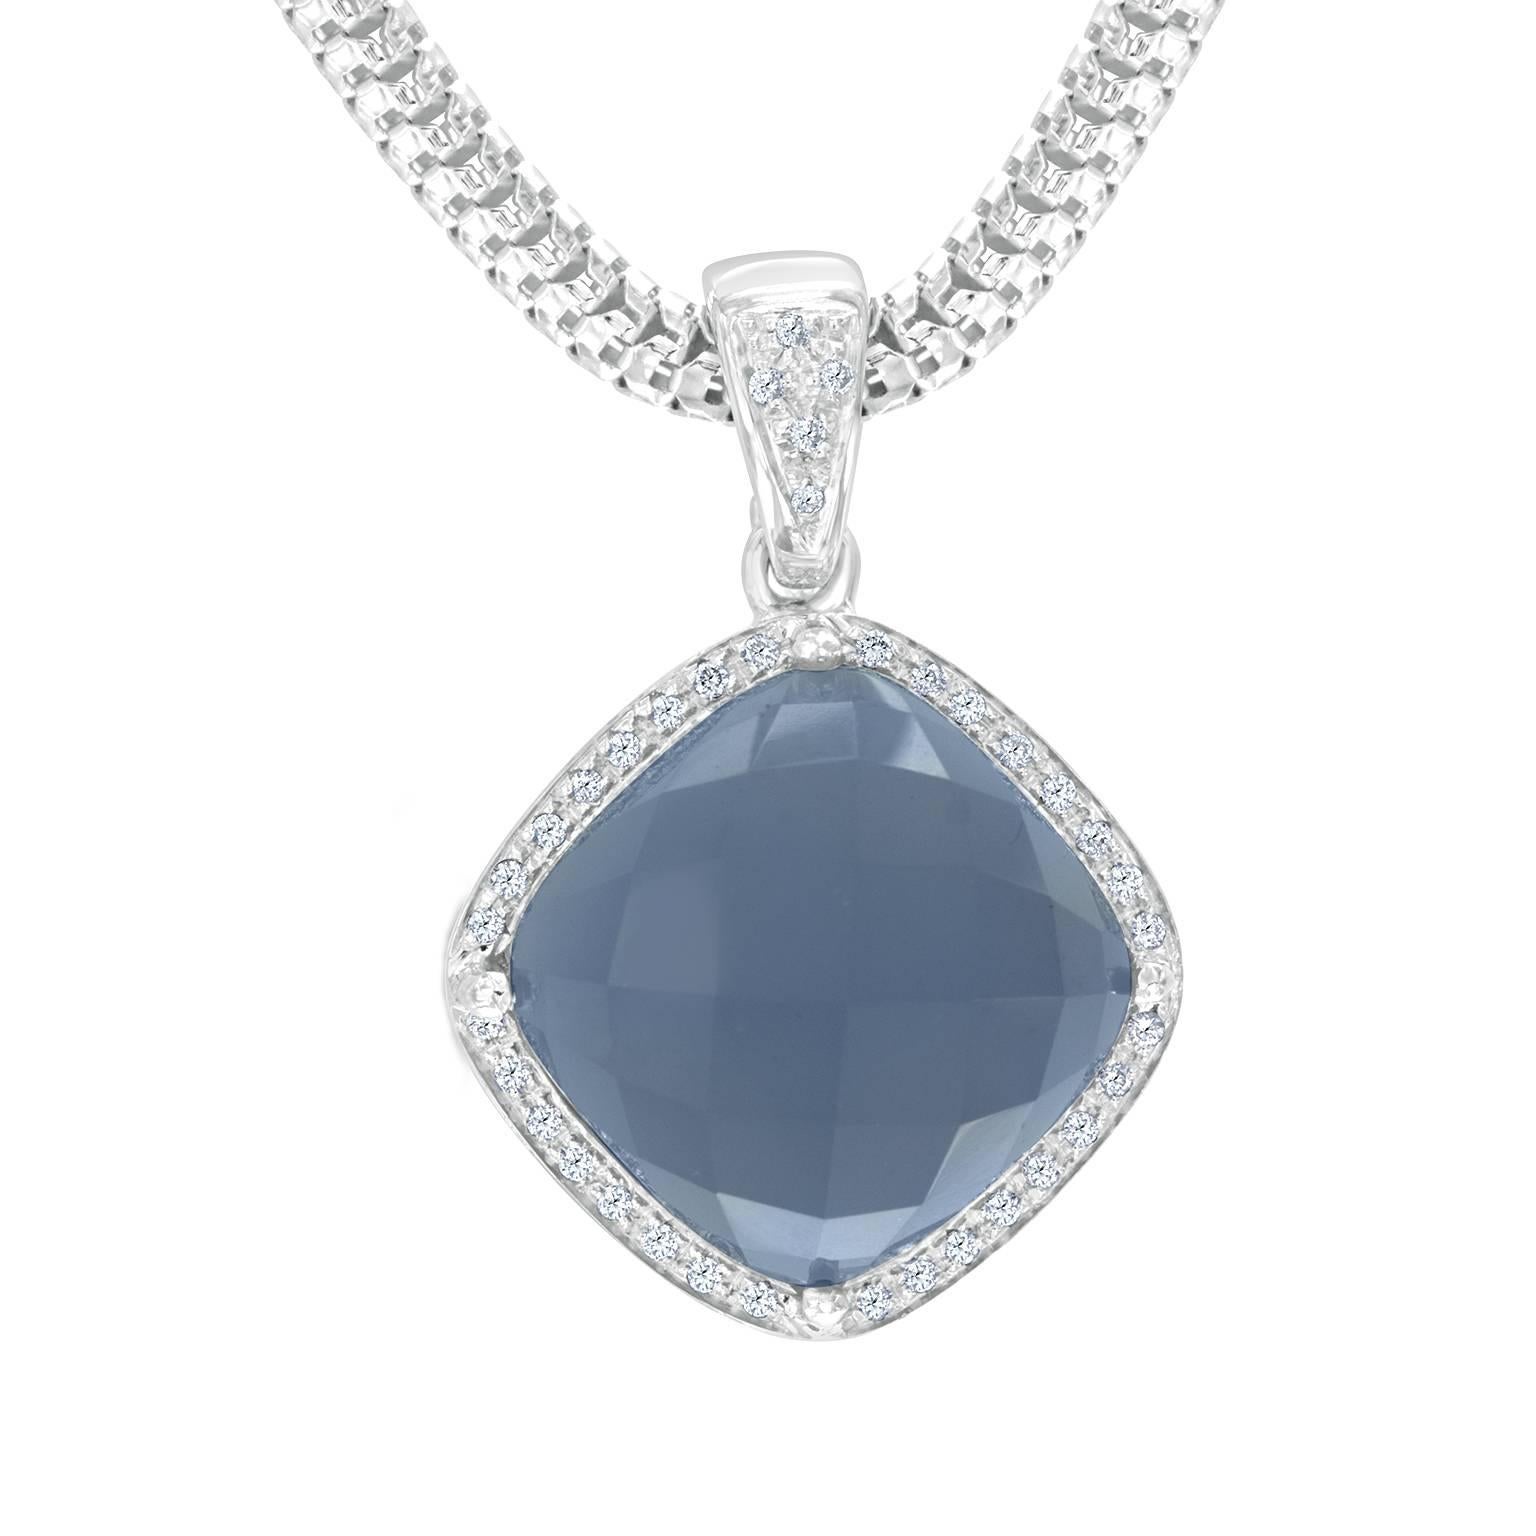 This Rina Limor designer necklace features a 16.0 x 16.0mm checkerboard faceted blue chalcedony set with 73- round brilliant cut diamonds weighing 0.50 carats total. With an 18 karat white gold 18 inch chain measuring 3.30mm wide. Pendant is